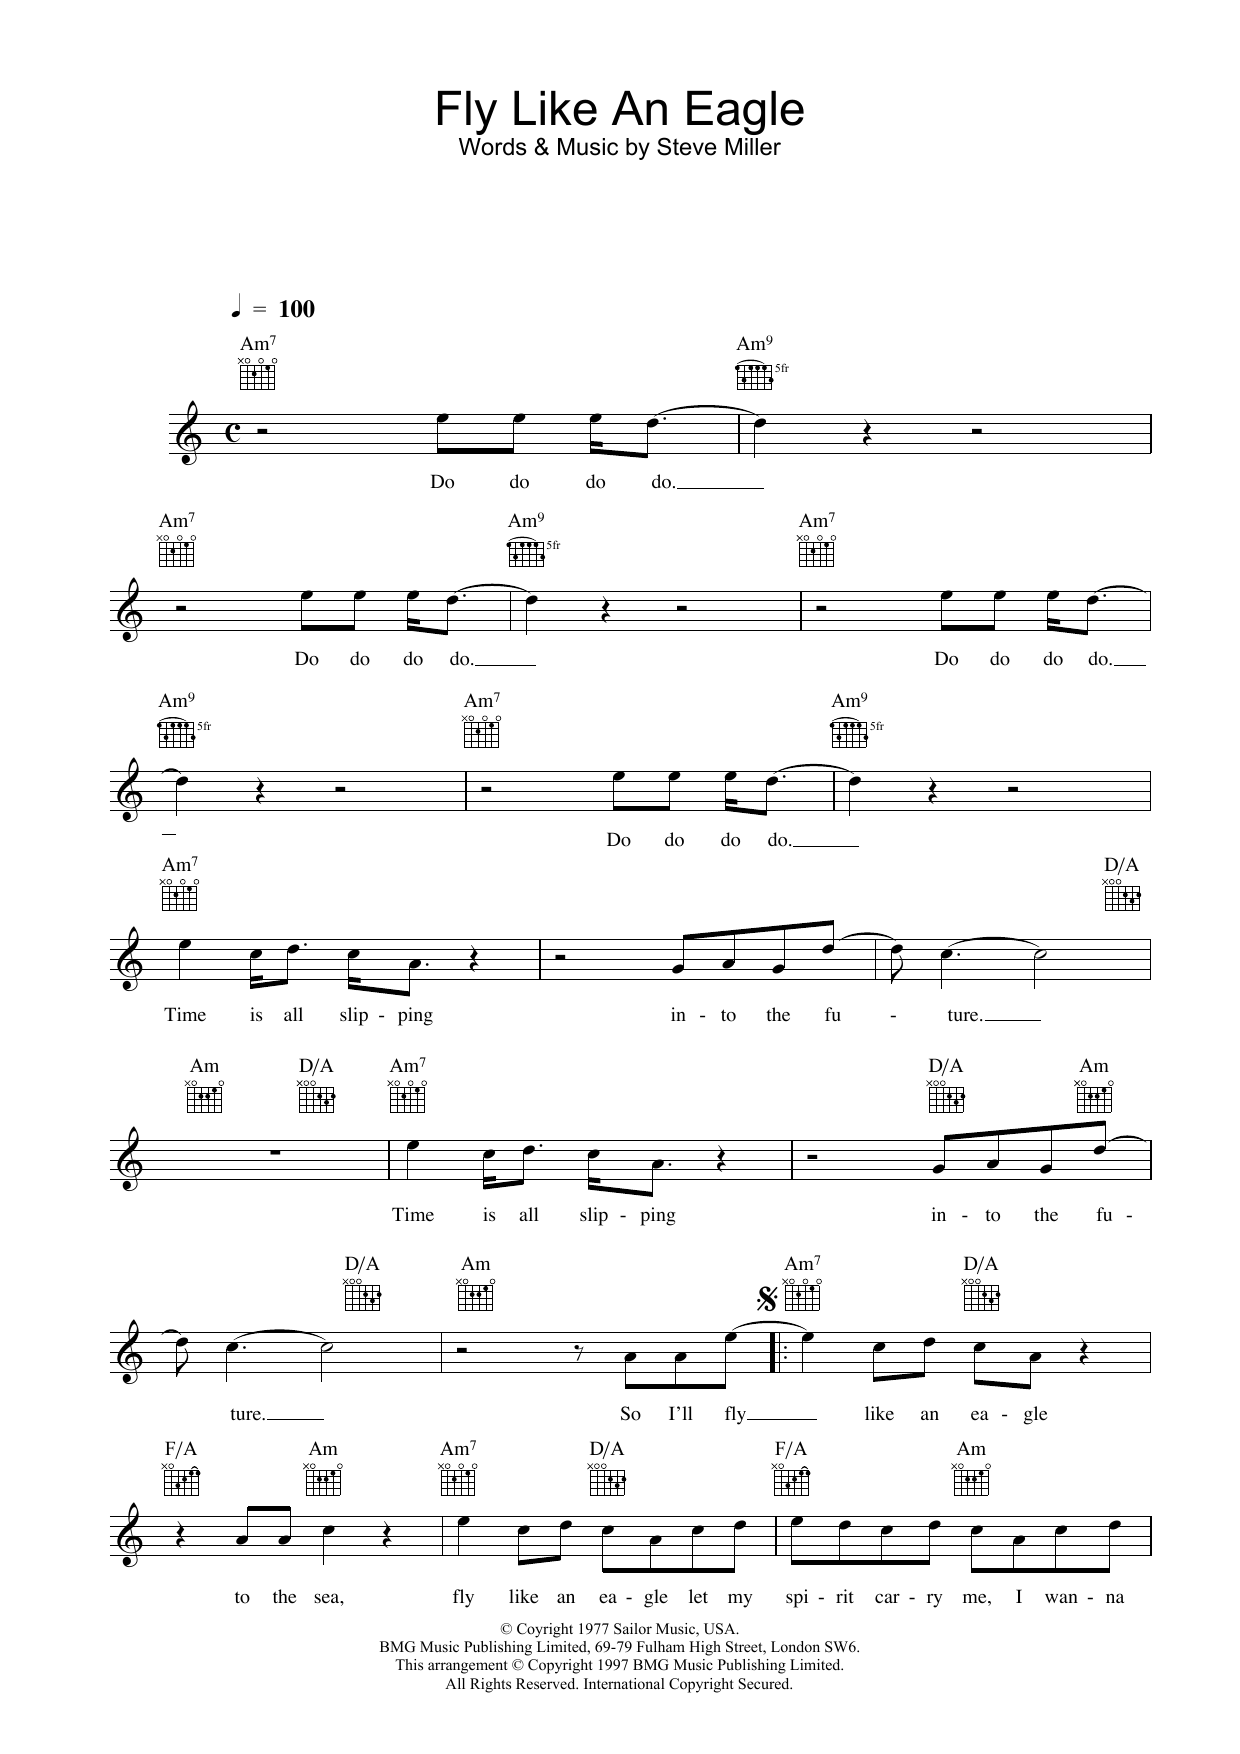 Download The Steve Miller Band Fly Like An Eagle Sheet Music